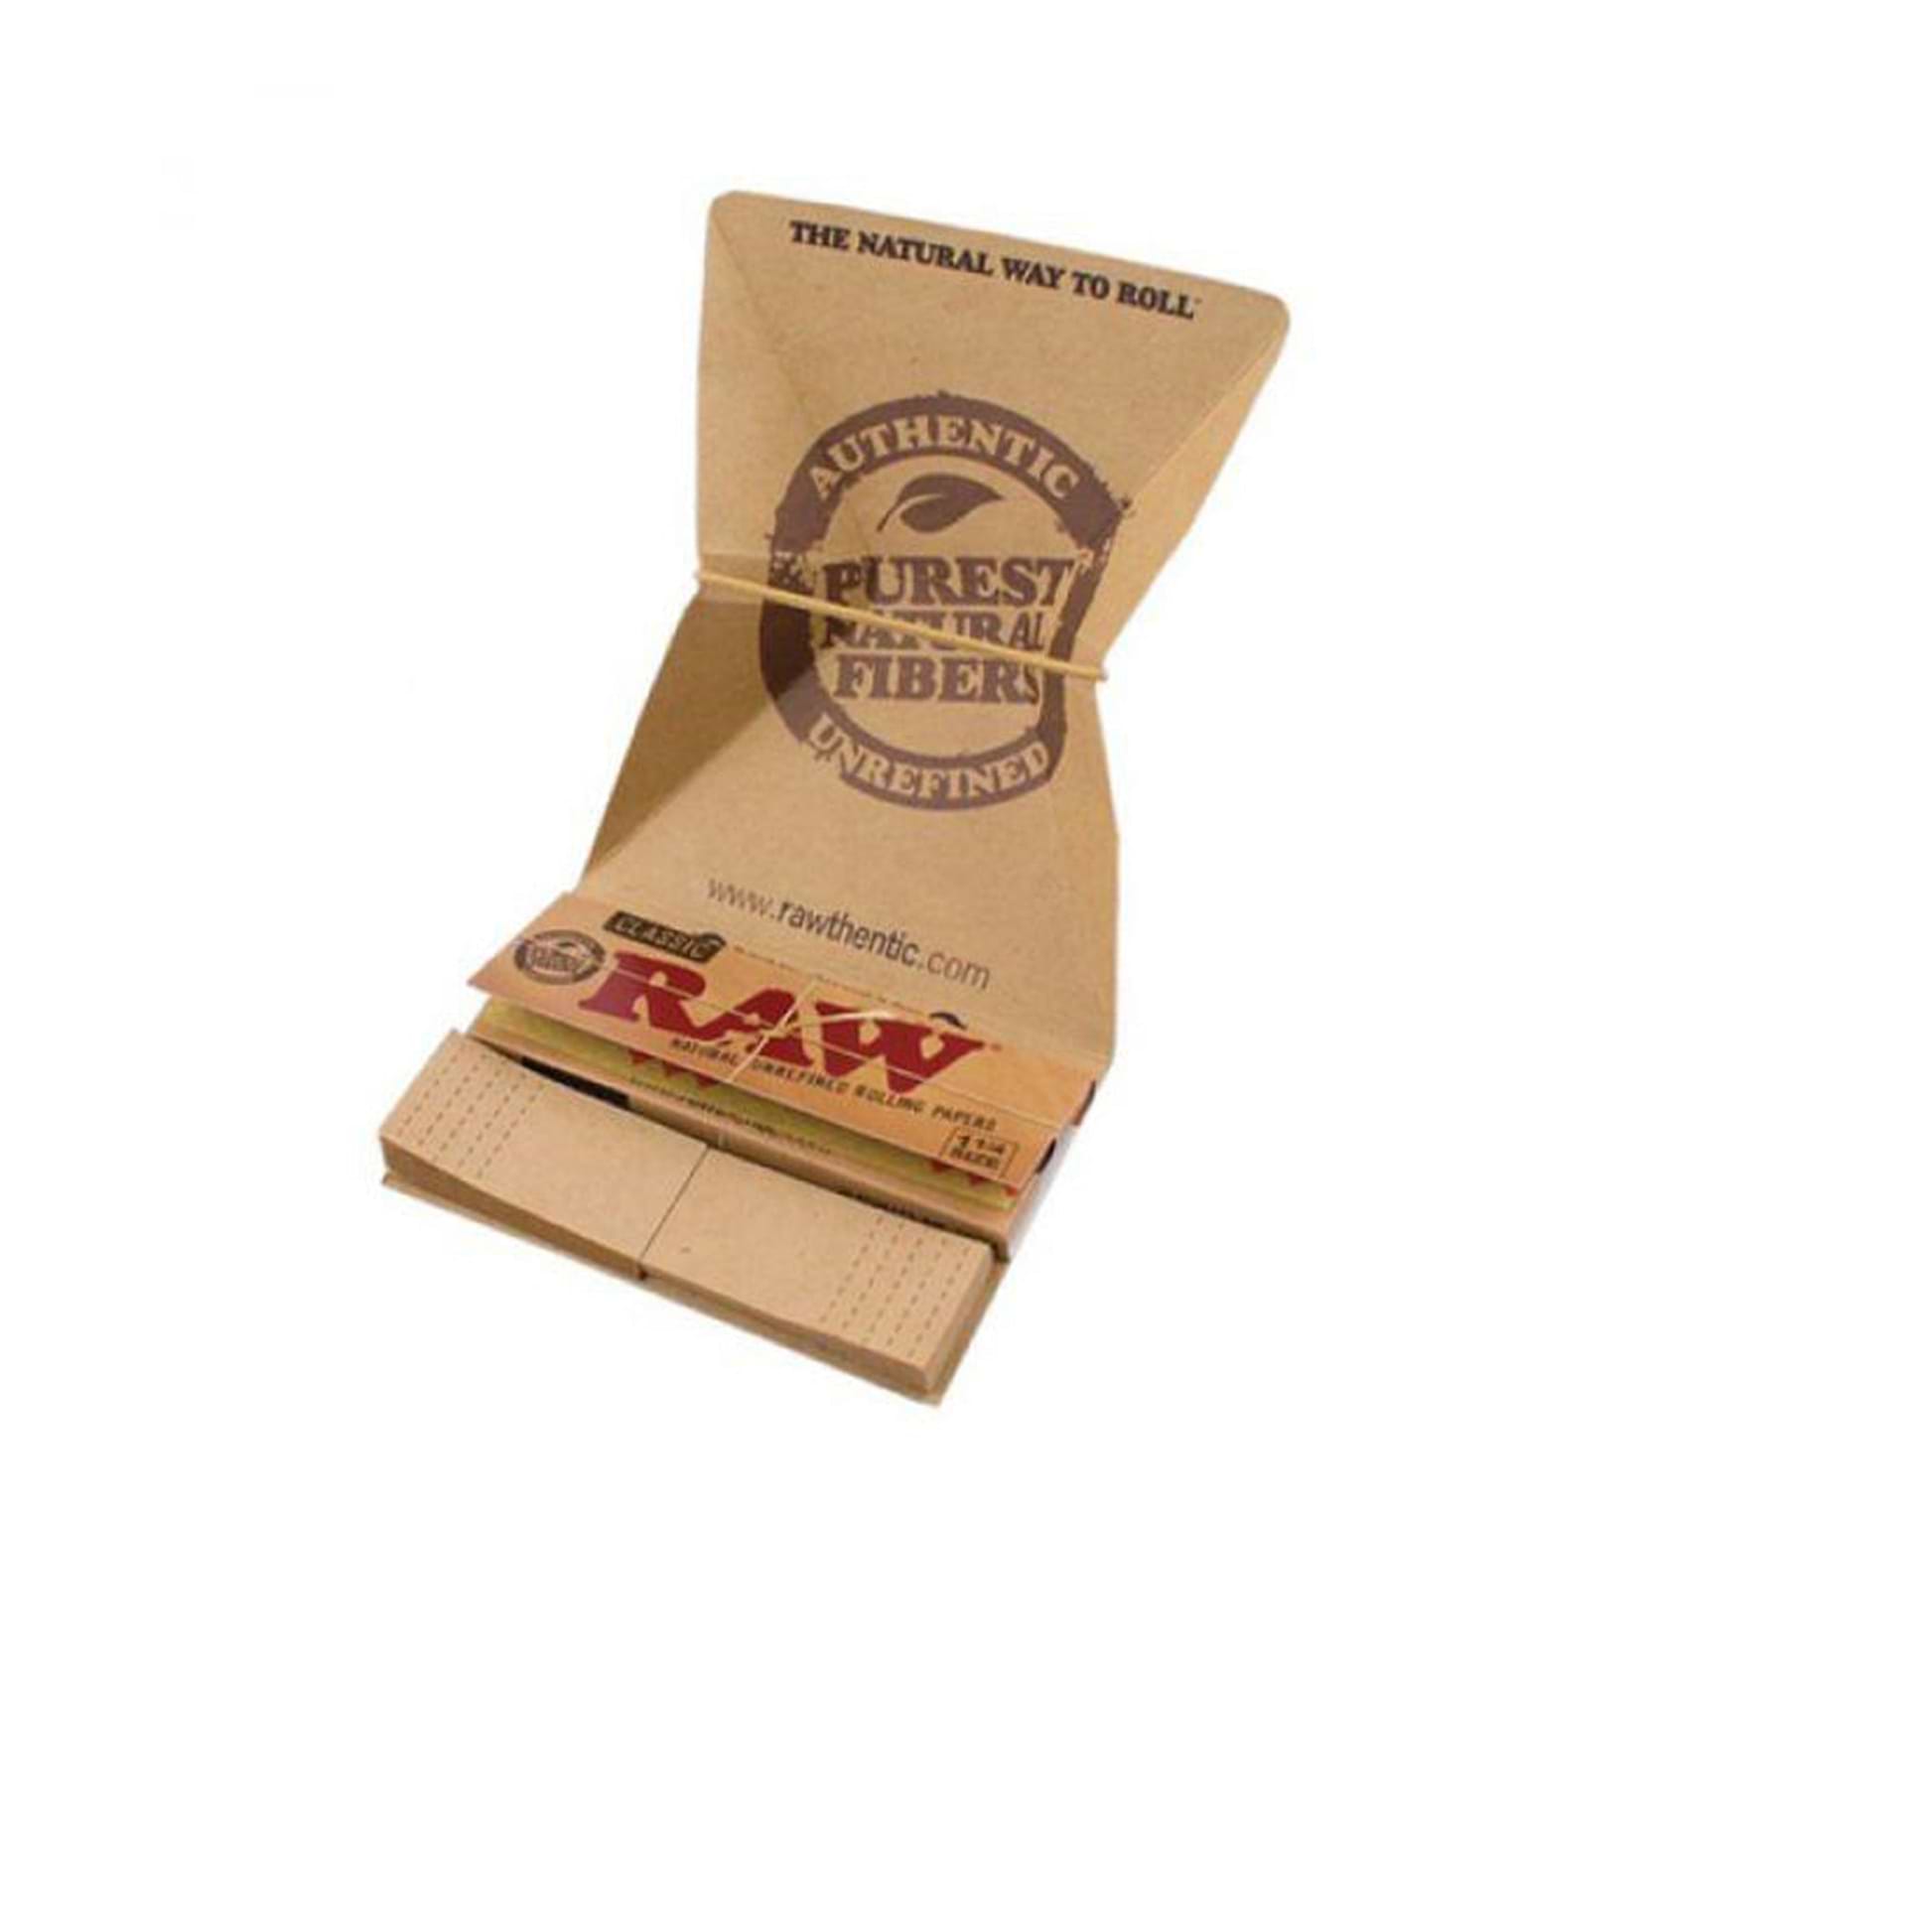 RAW Rolling Papers Artesano 1 1/4